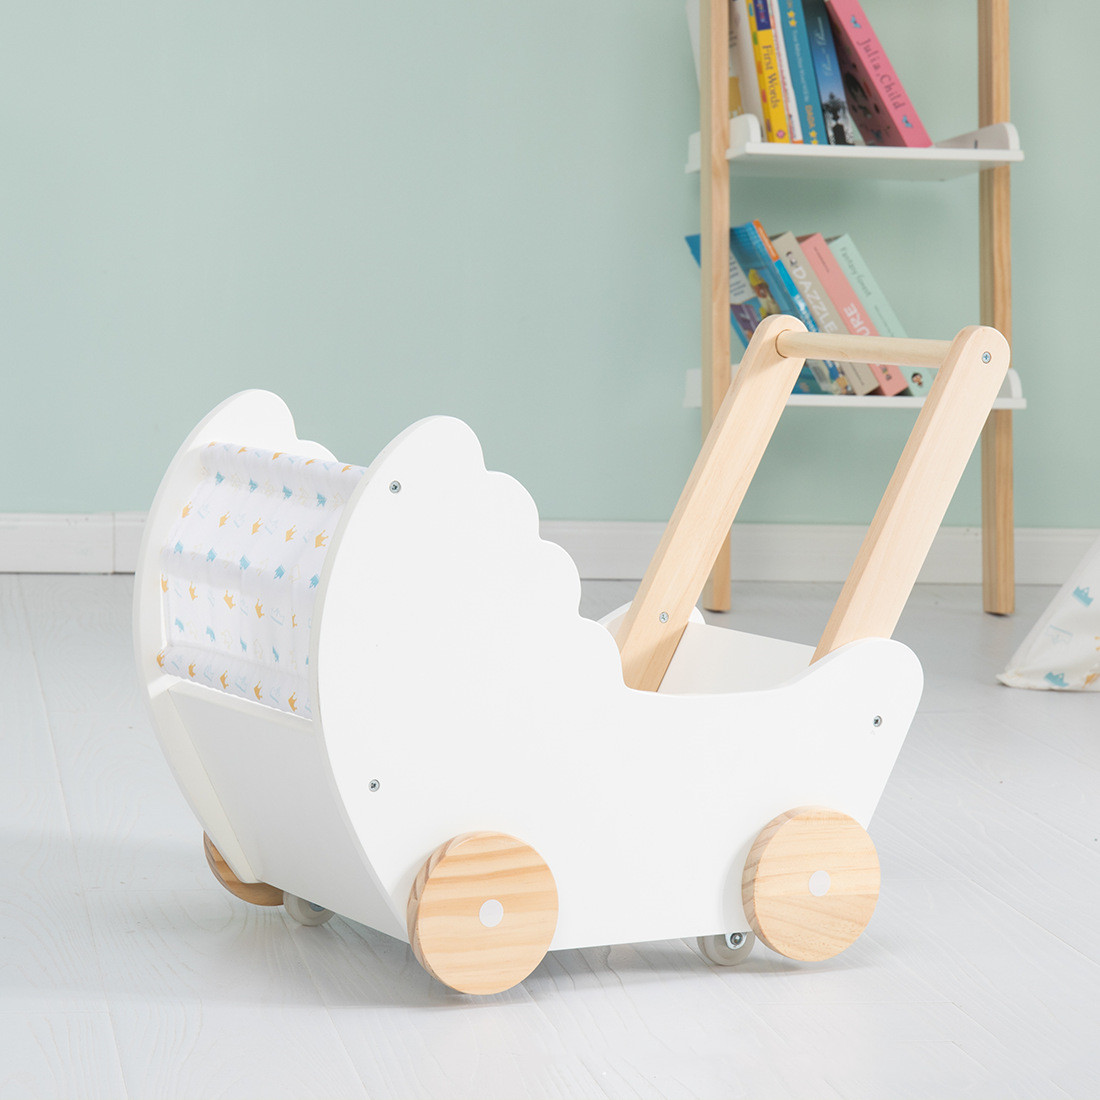 MDF Baby Learning Walker Wooden Toys